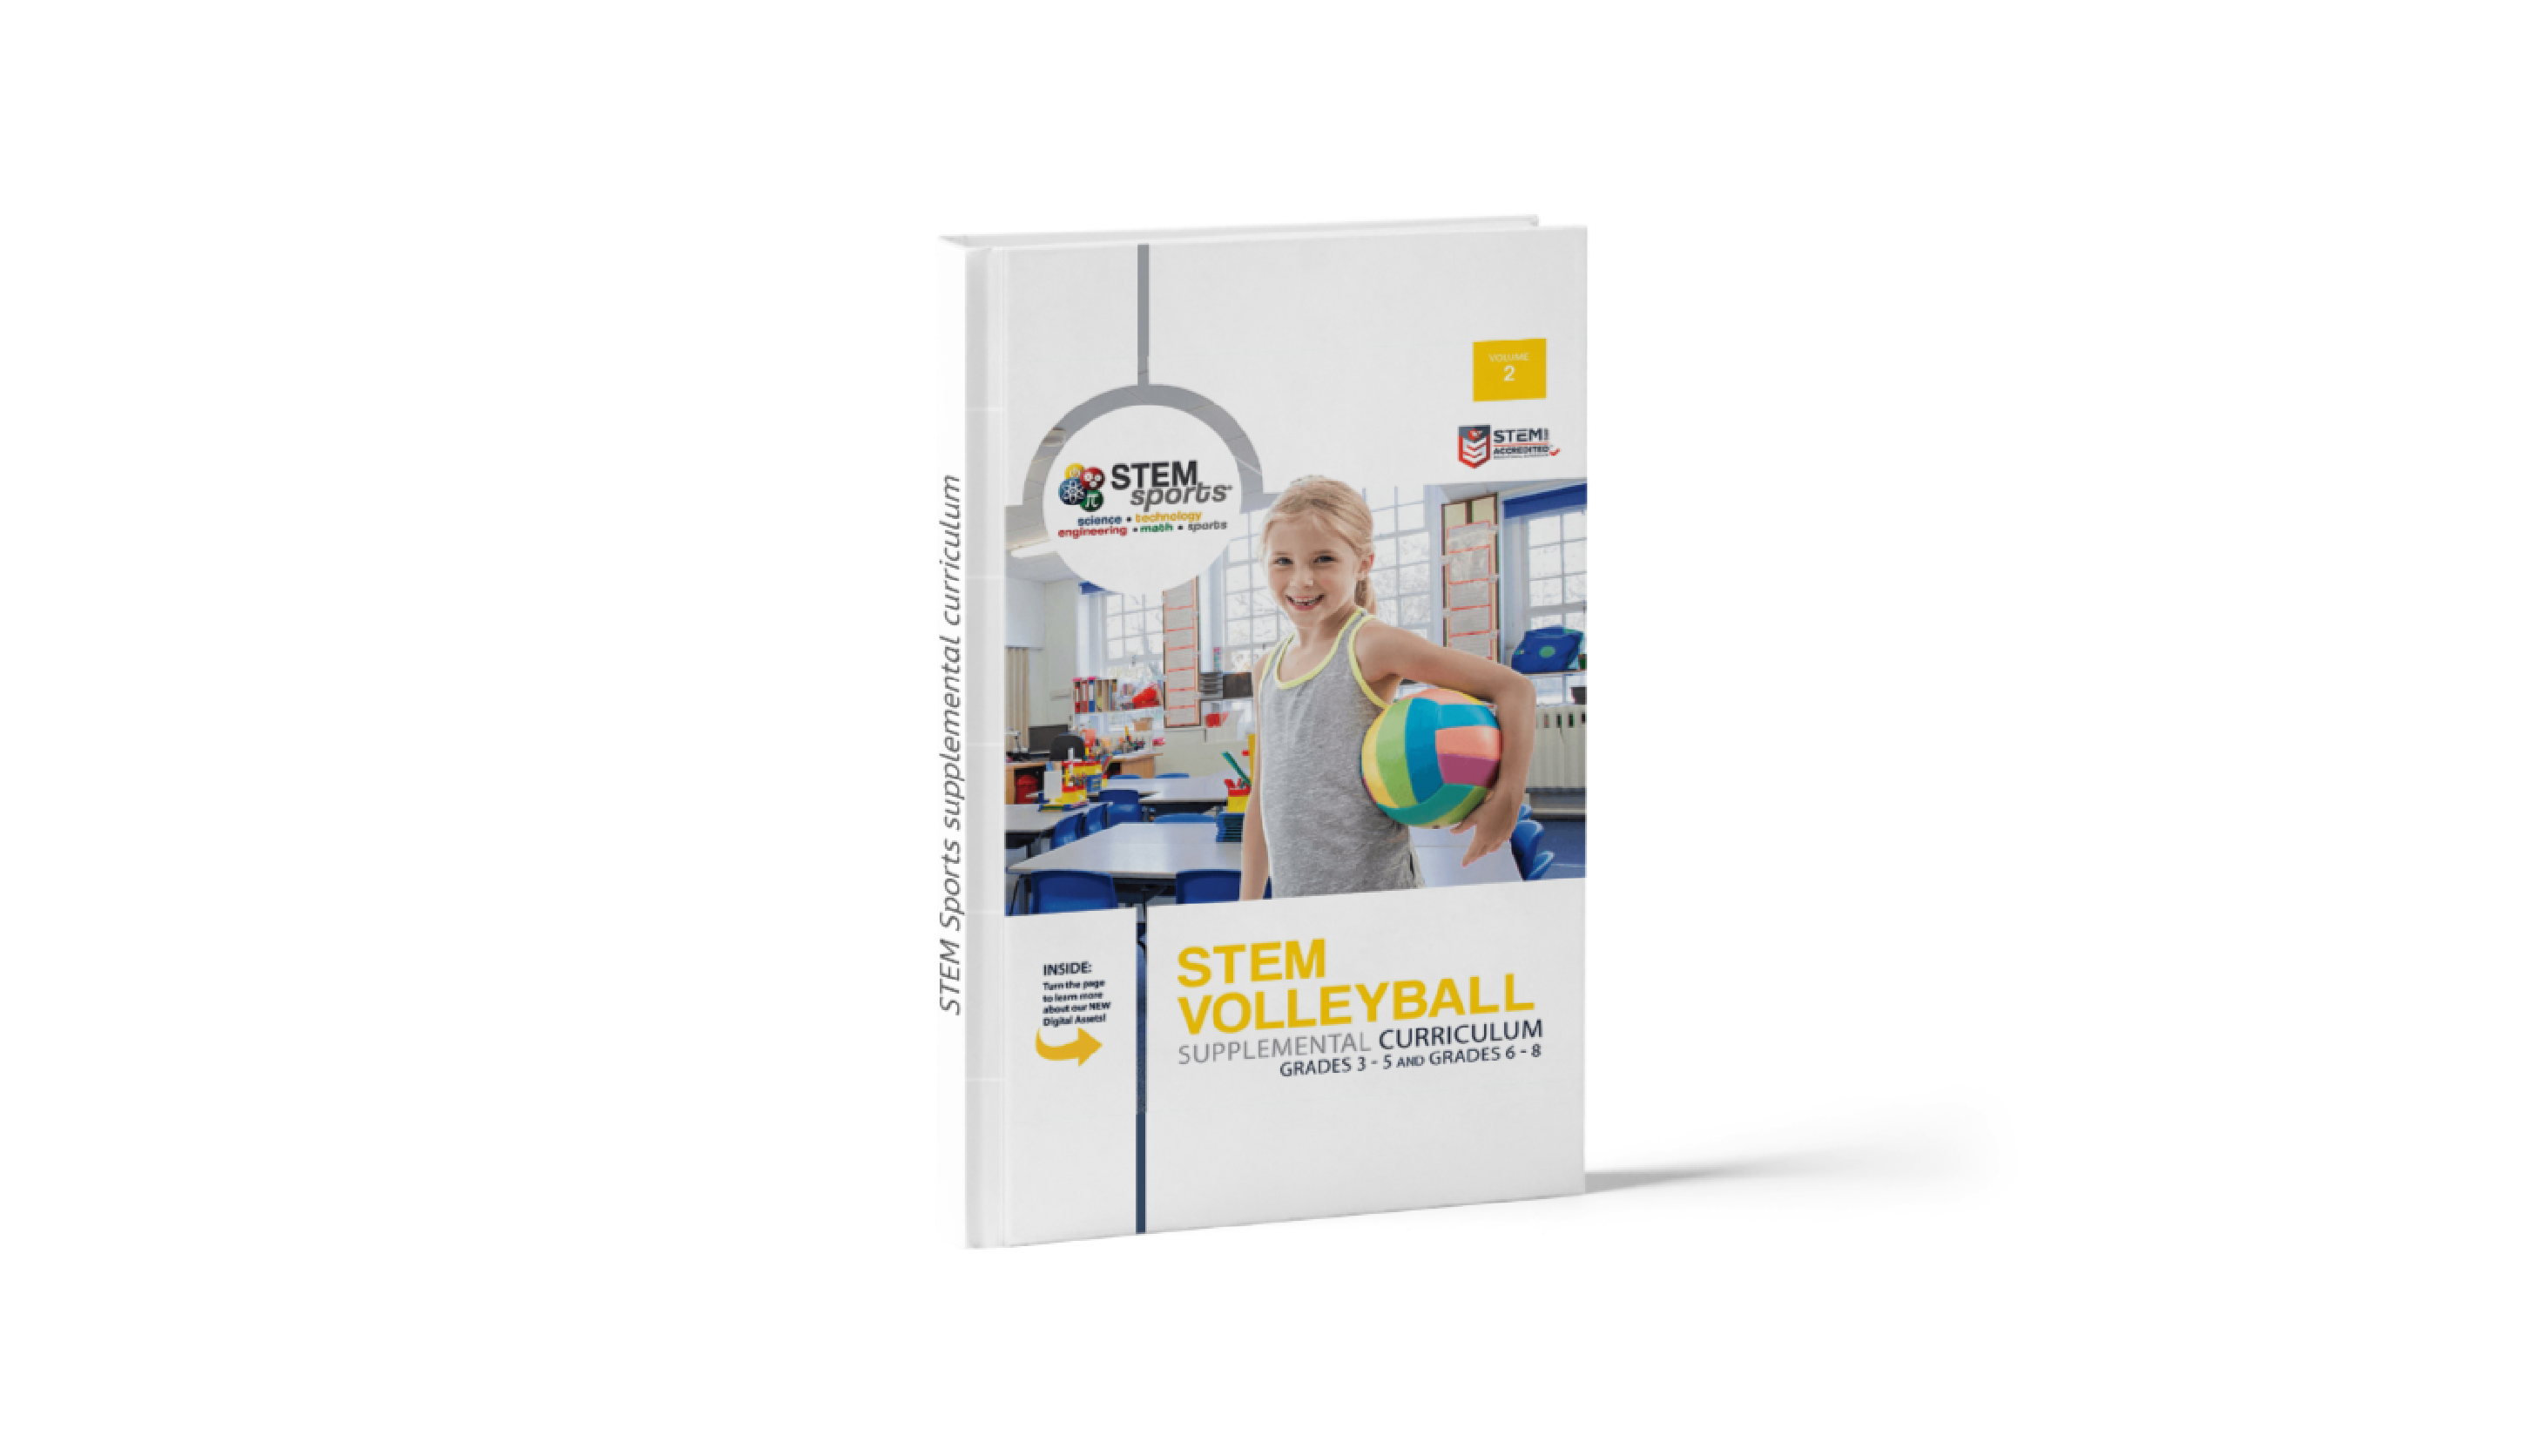 Stem Volleyball Manual, Stem Volleyball curriculam